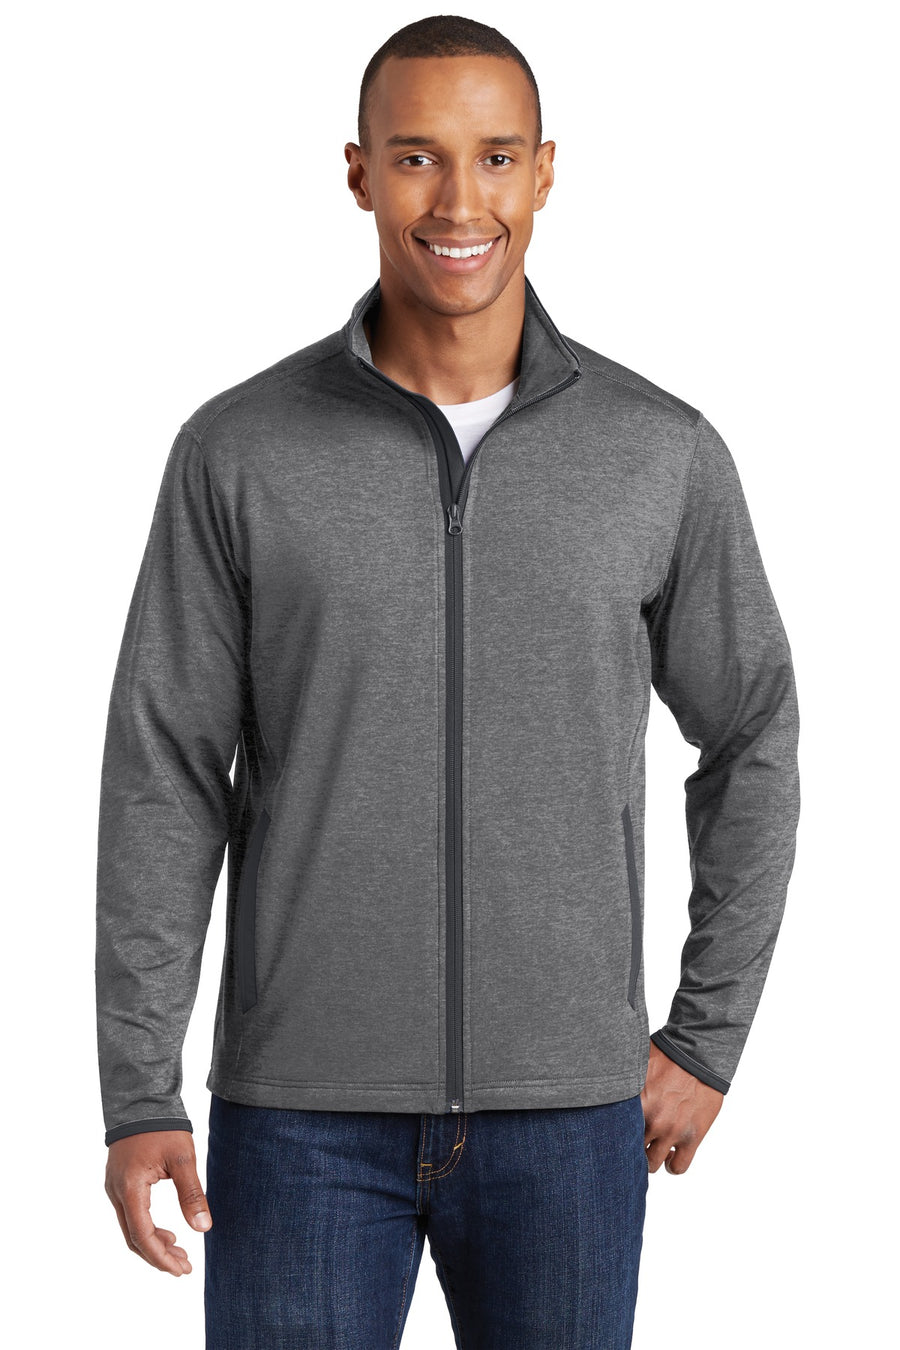 ST853-Charcoal Grey Heather/ Charcoal Grey-front_model